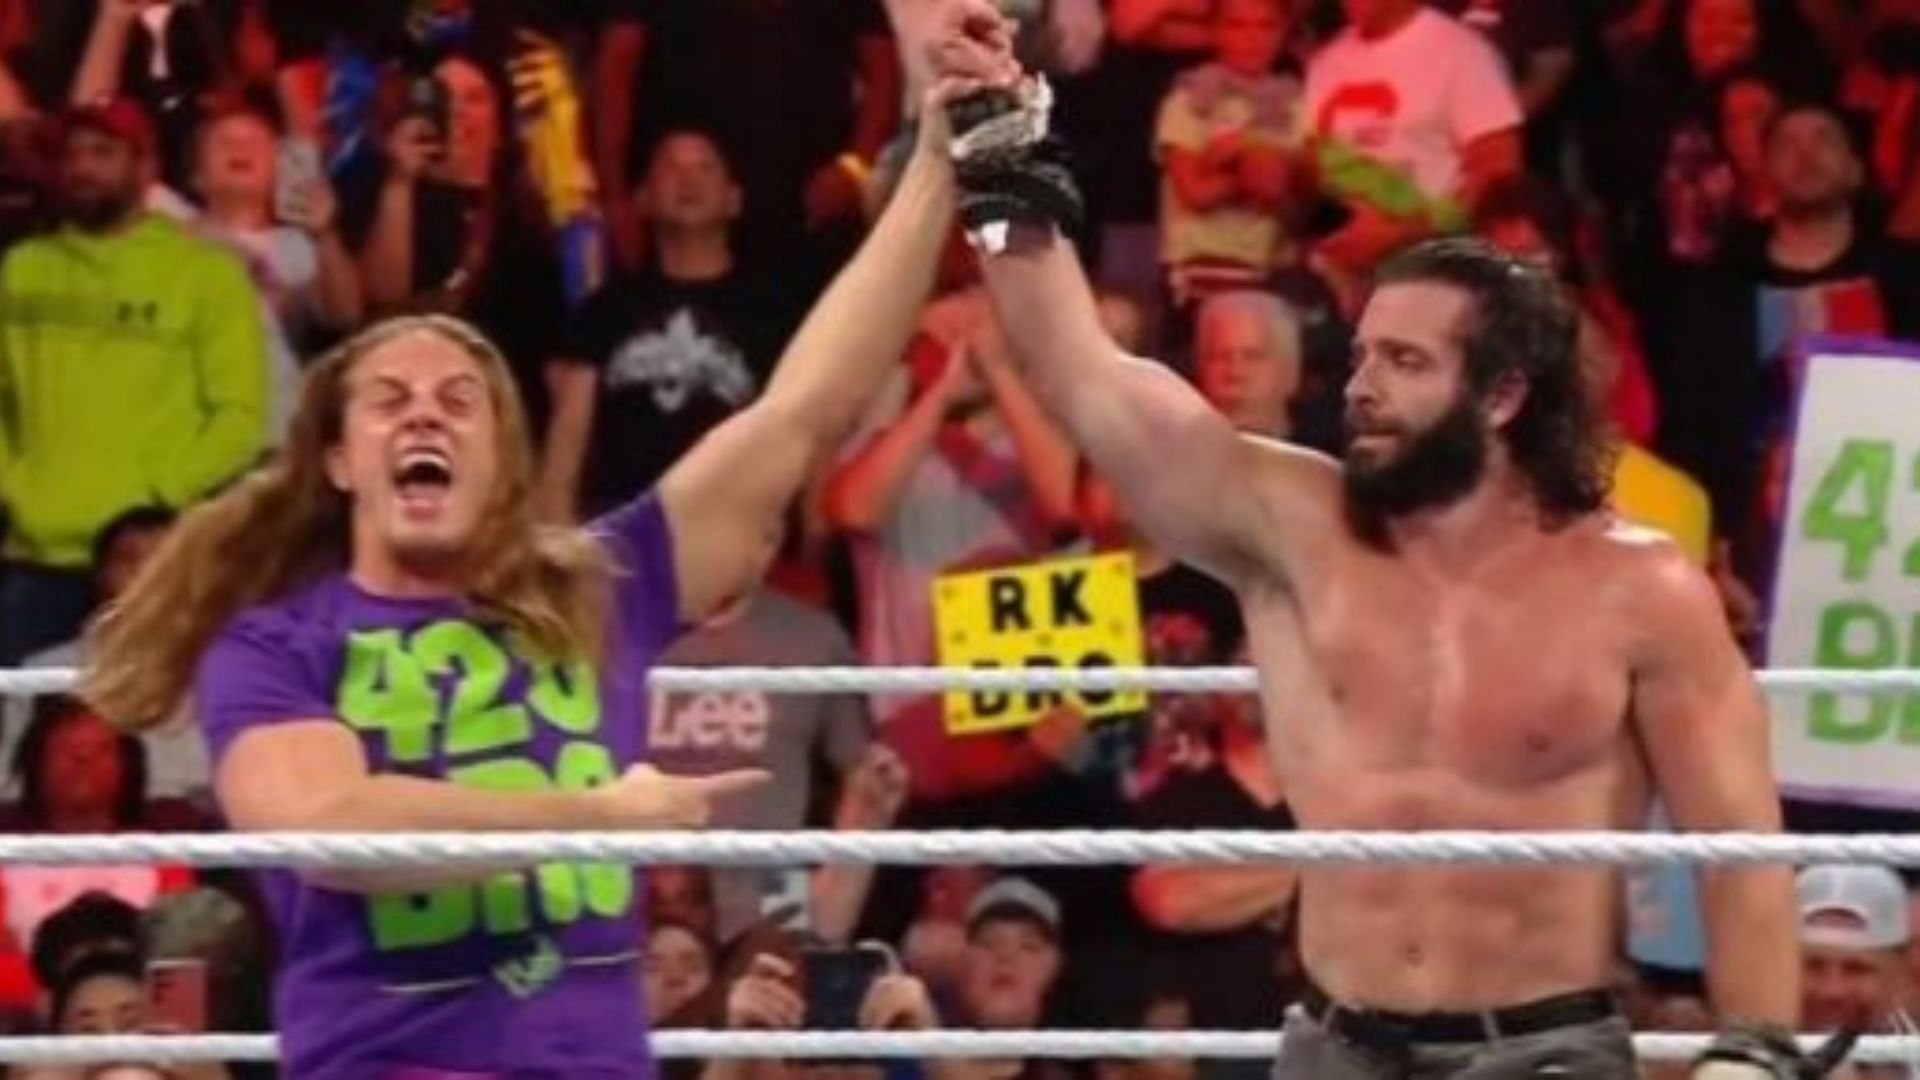 Matt Riddle and Elias teamed up to defeat The Alpha Academy on RAW